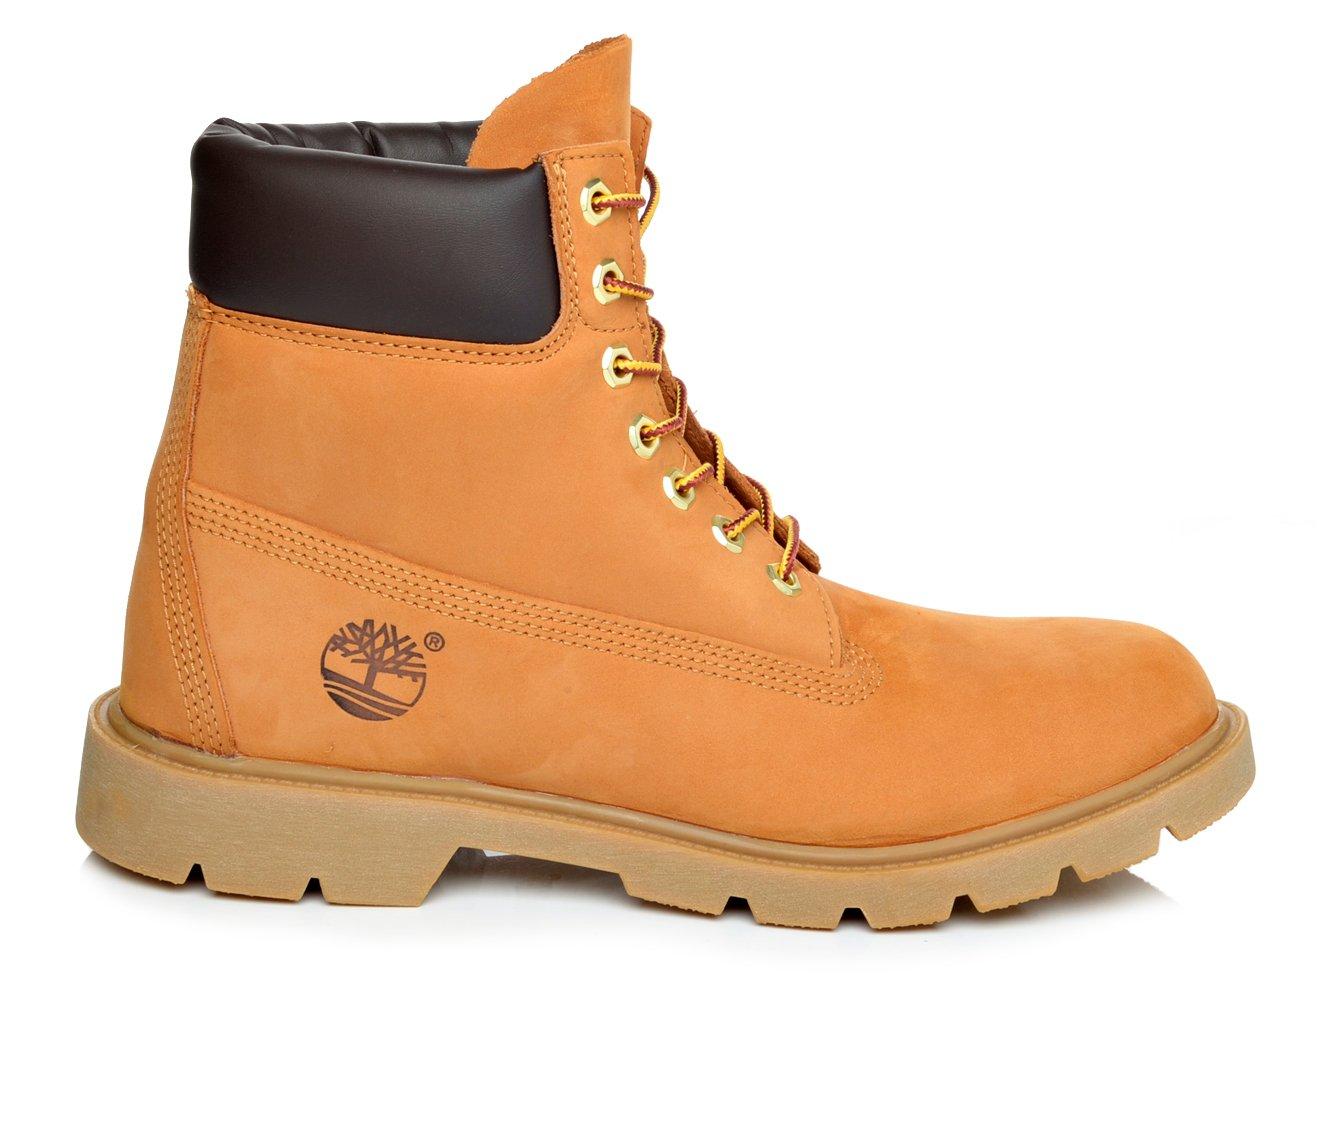 Does Shoe Carnival Sell Timberlands?